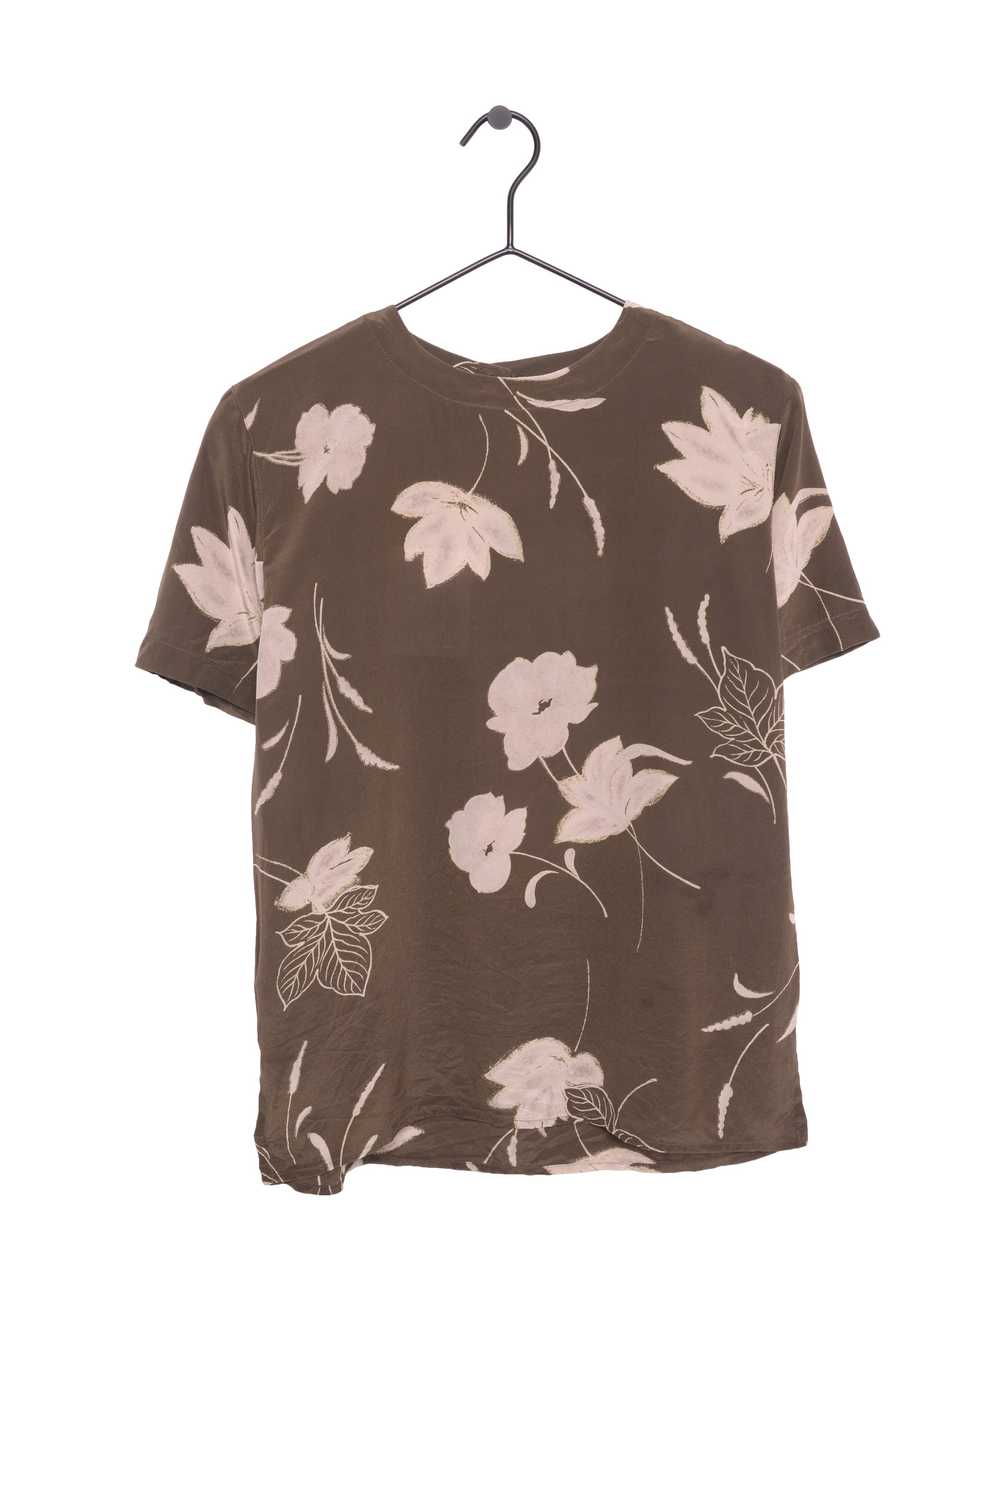 1990s Floral Silk Top - image 1